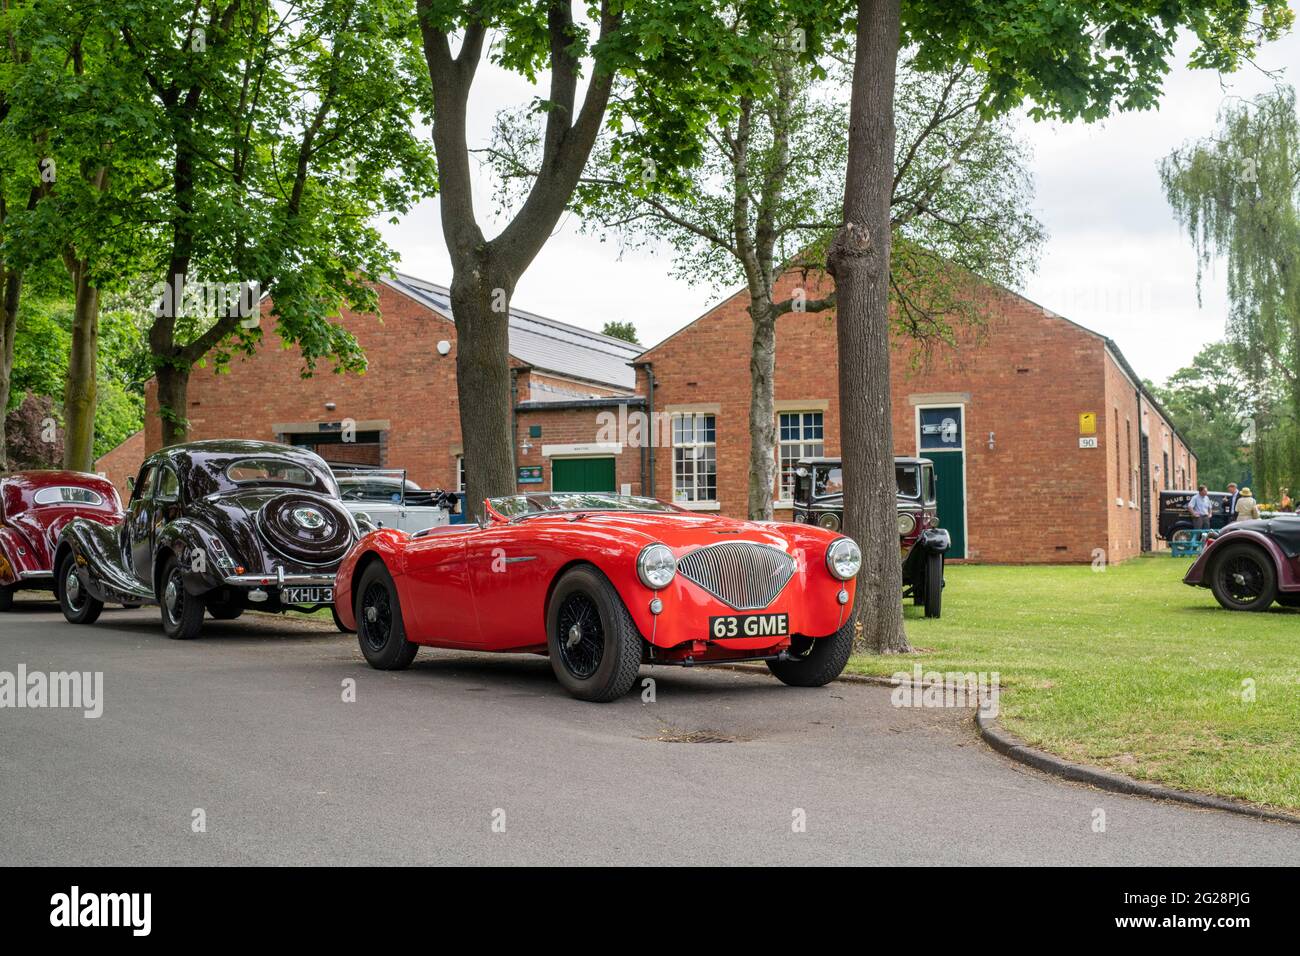 1955 Austin Healey car at Bicester heritage centre, sunday scramble event. Bicester, Oxfordshire, UK Stock Photo